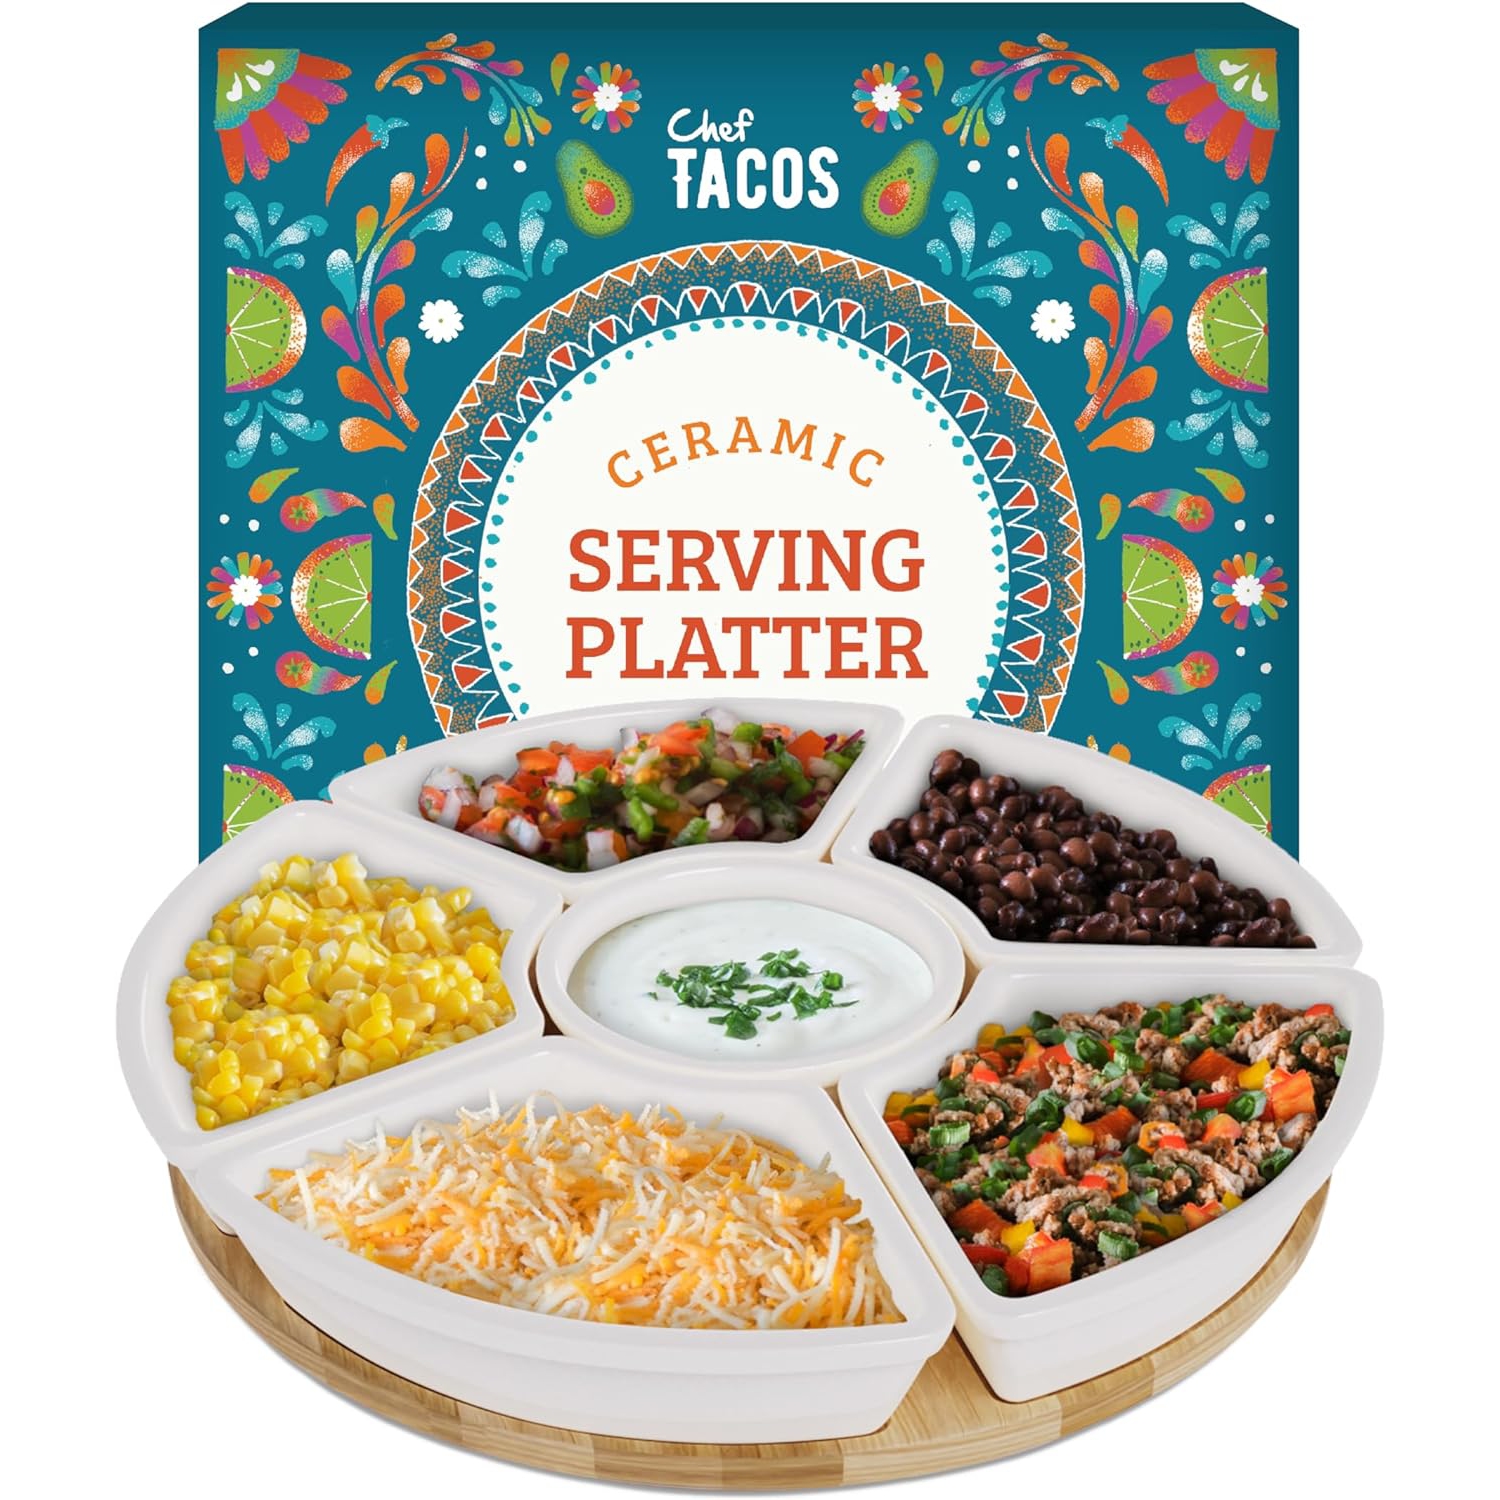 Chef Tacos Ceramic Taco Serving Platter - Divided Serving Tray for Taco Tuesday Lazy Susan Taco Bar - Chip and Dip Serving Set for Party - Appetizer Serving Tray for Salsa, Snacks